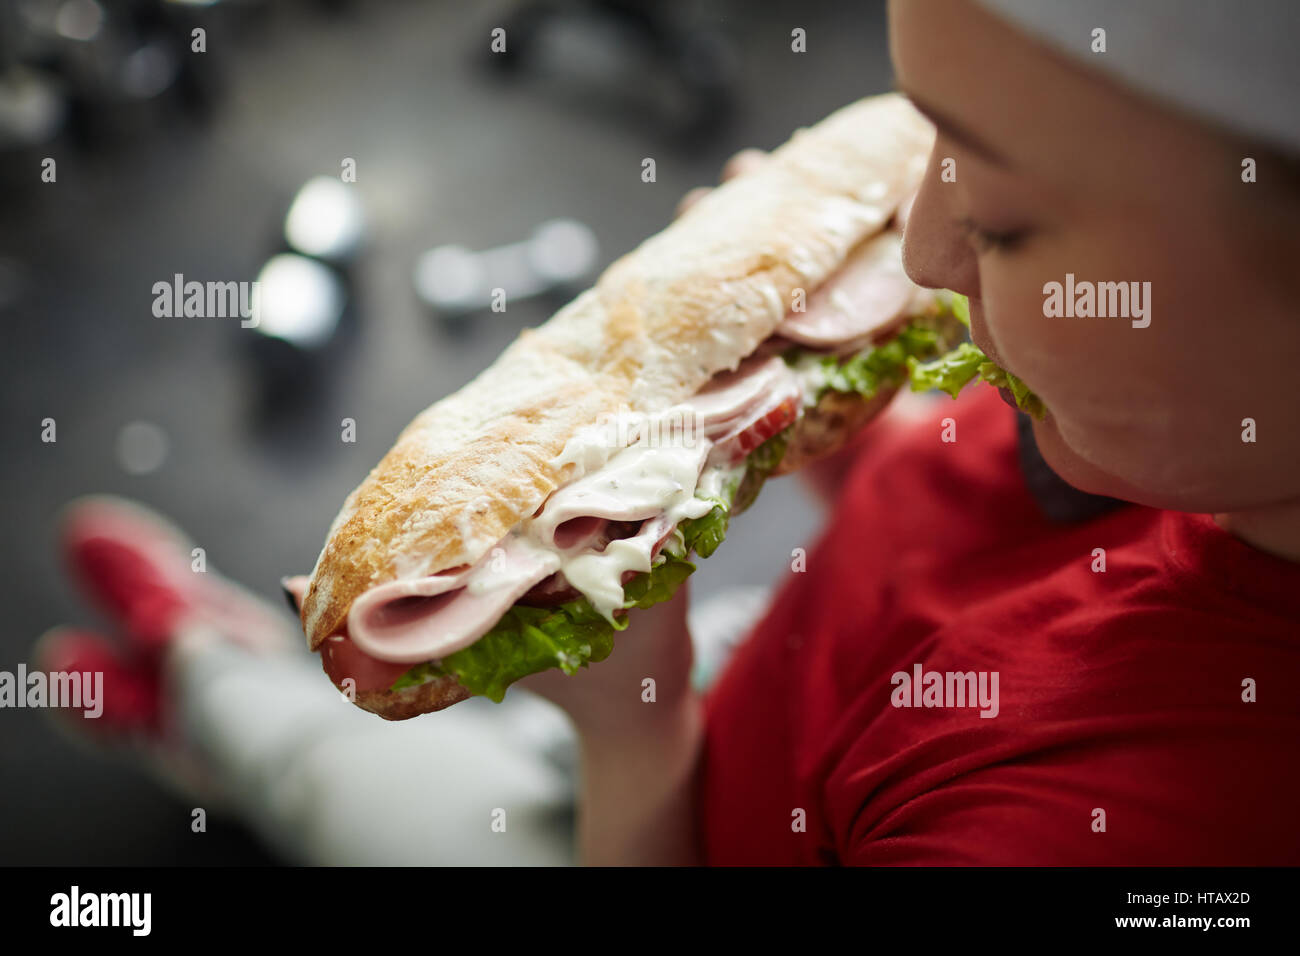 High angle shot of young overweight woman eating big greasy fattening sandwich at work out in gym, concept of food obsession Stock Photo